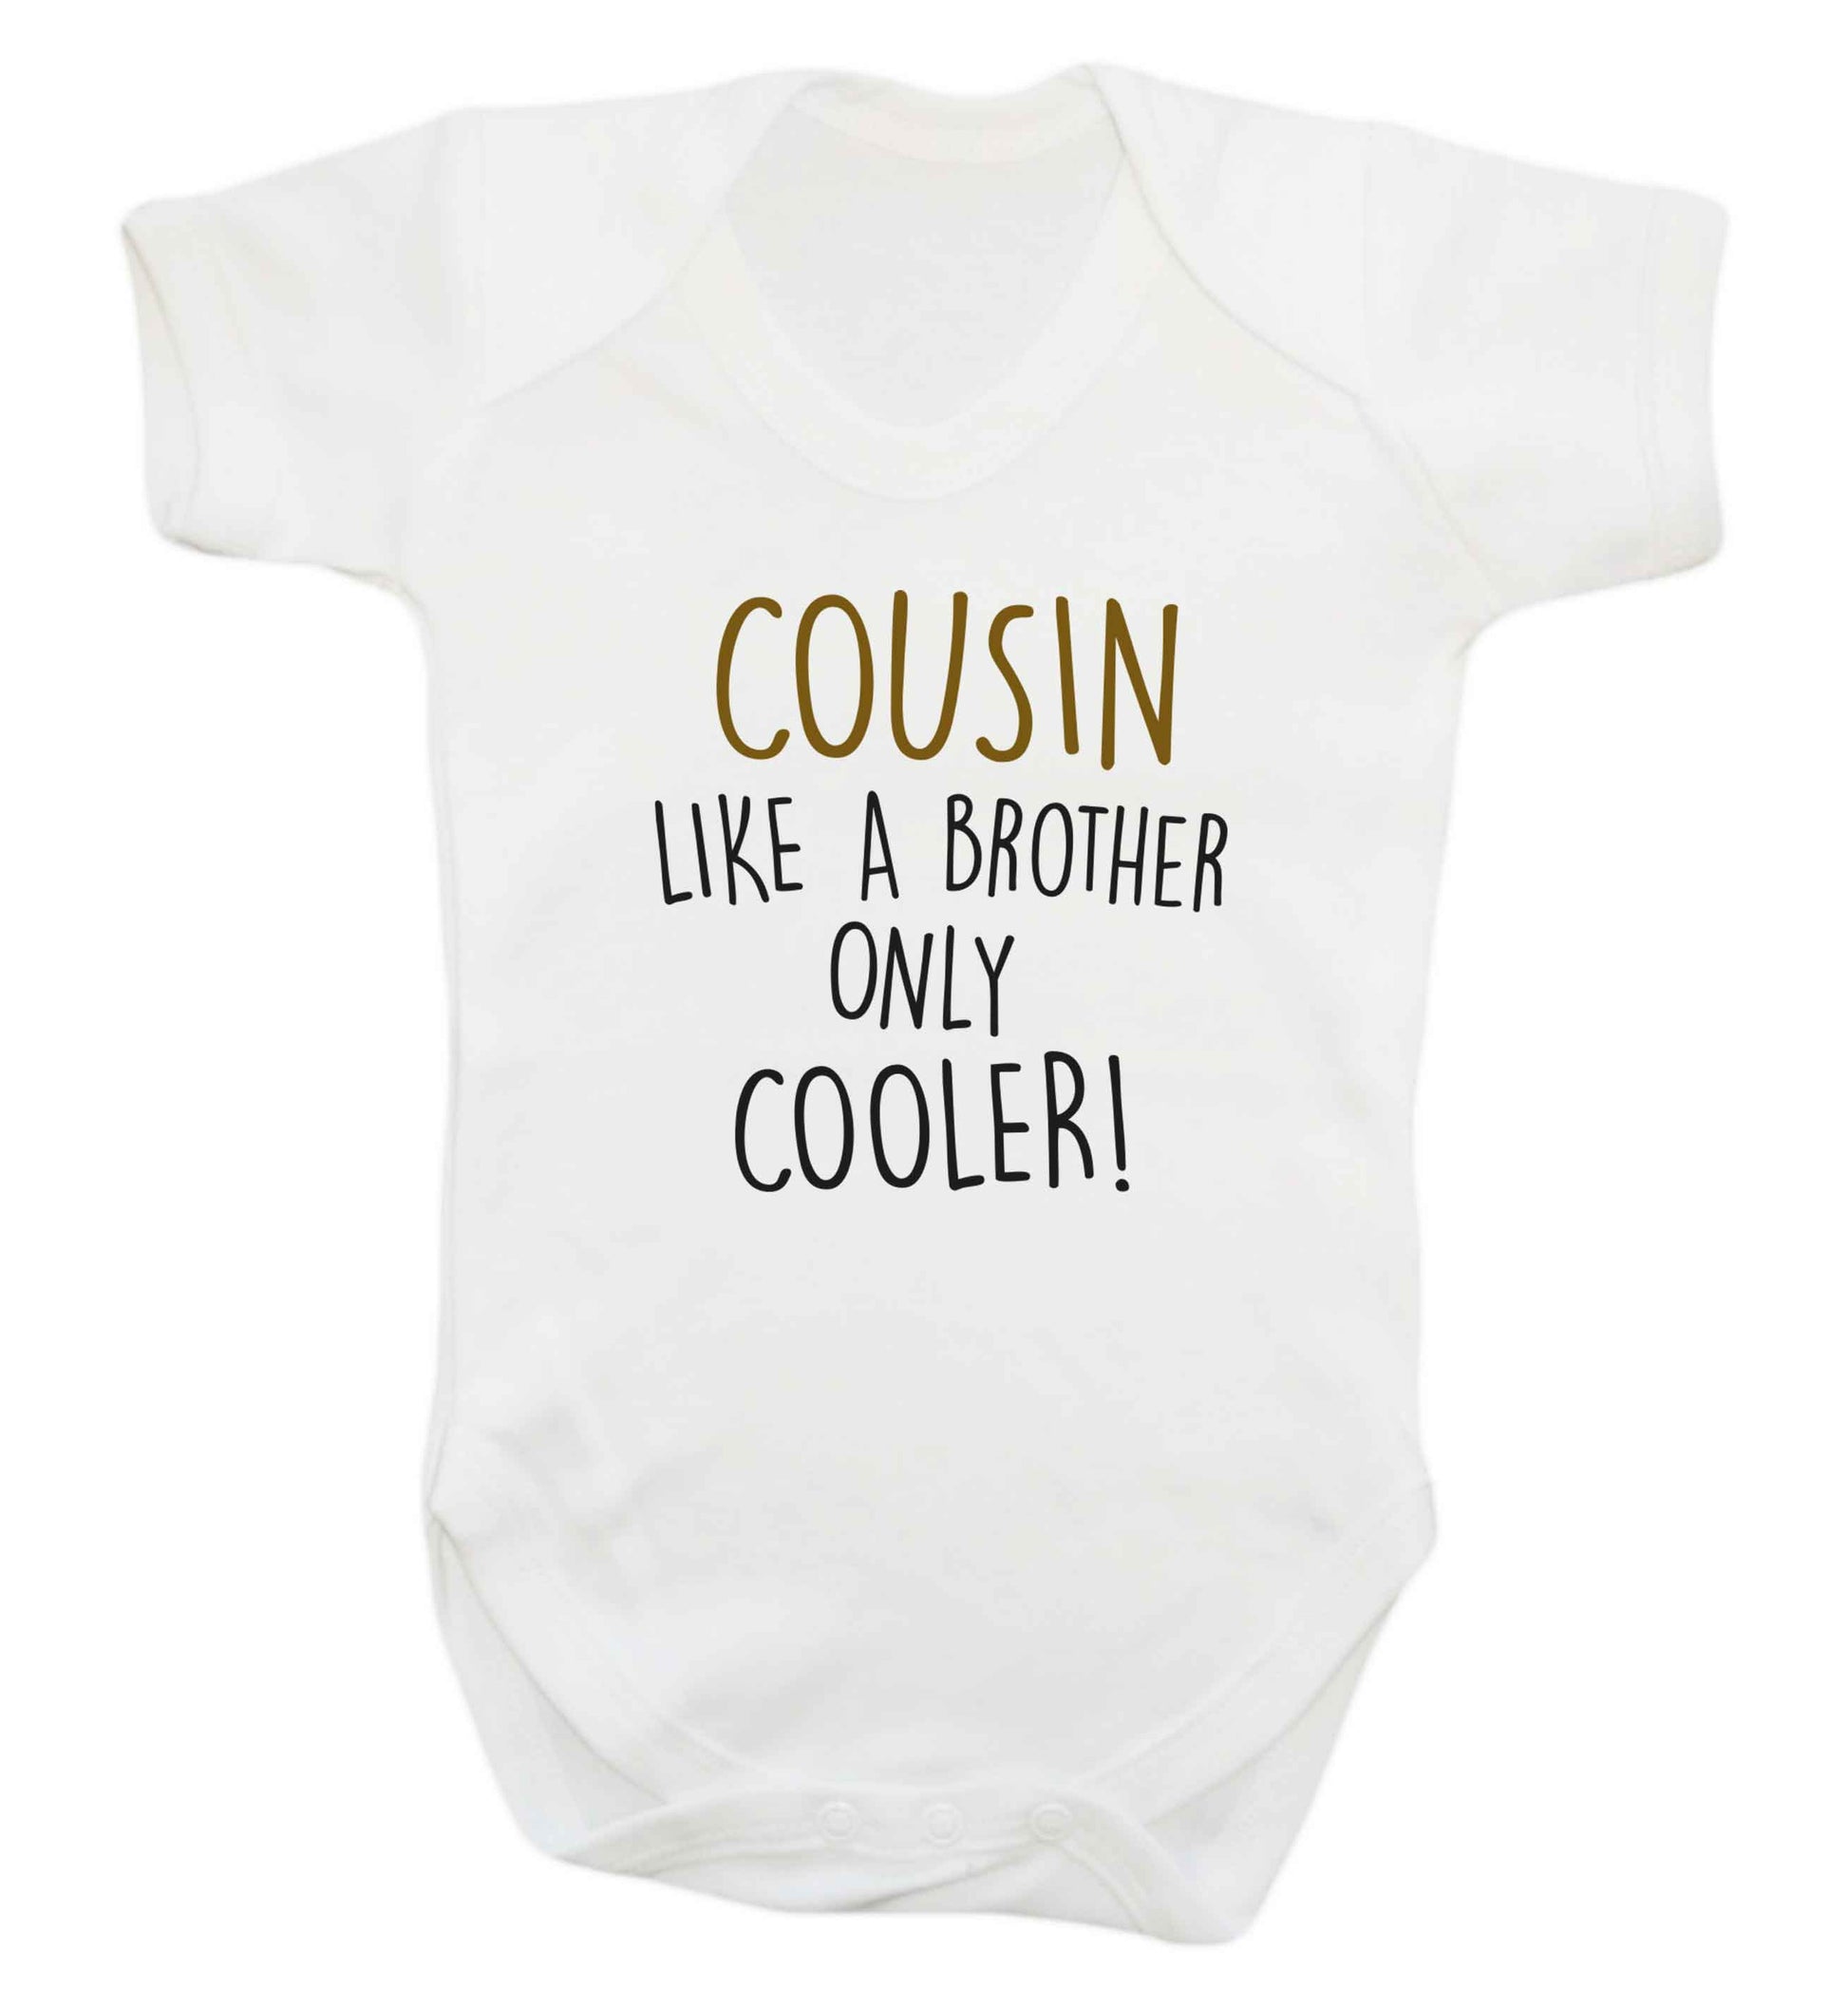 Cousin like a brother only cooler baby vest white 18-24 months